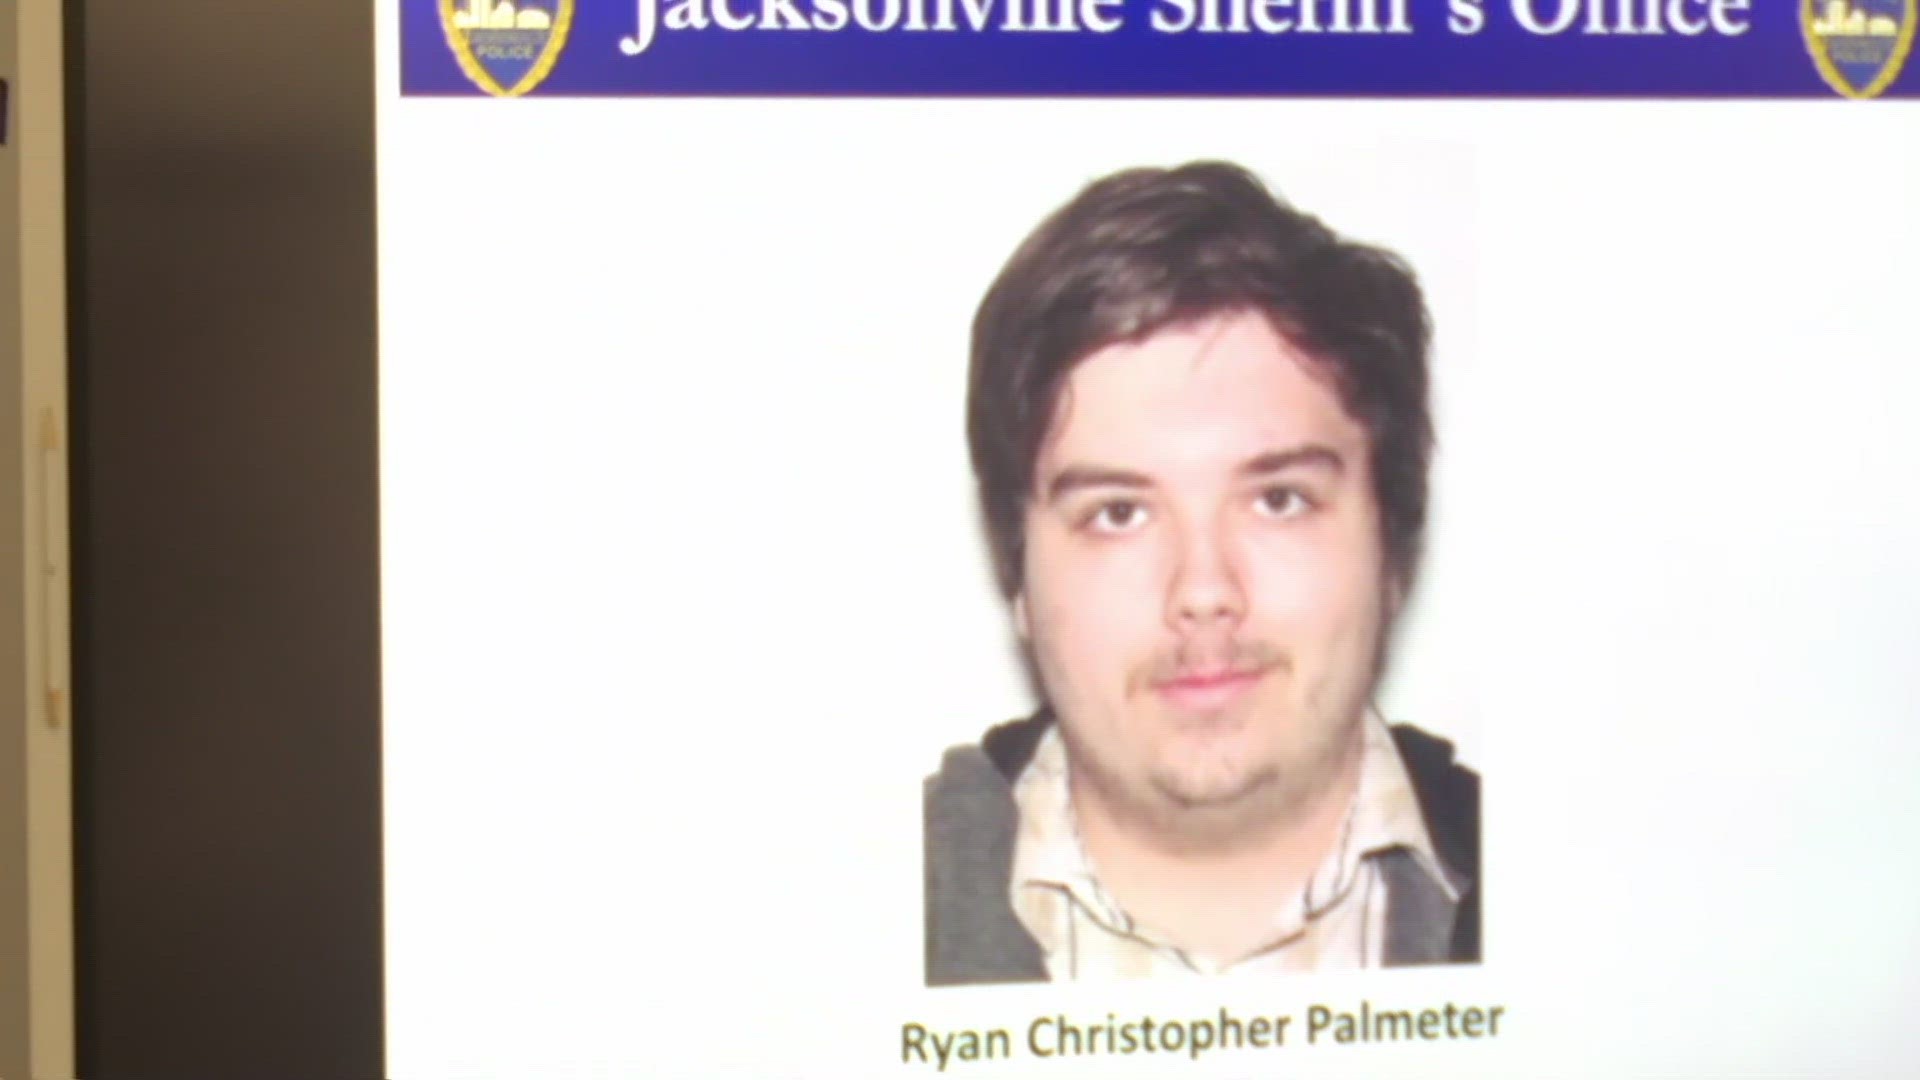 Ryan Christopher Palmeter, 21, was identified by the Jacksonville Sheriff's Office as the shooter in Saturday's racially-motivated mass shooting.